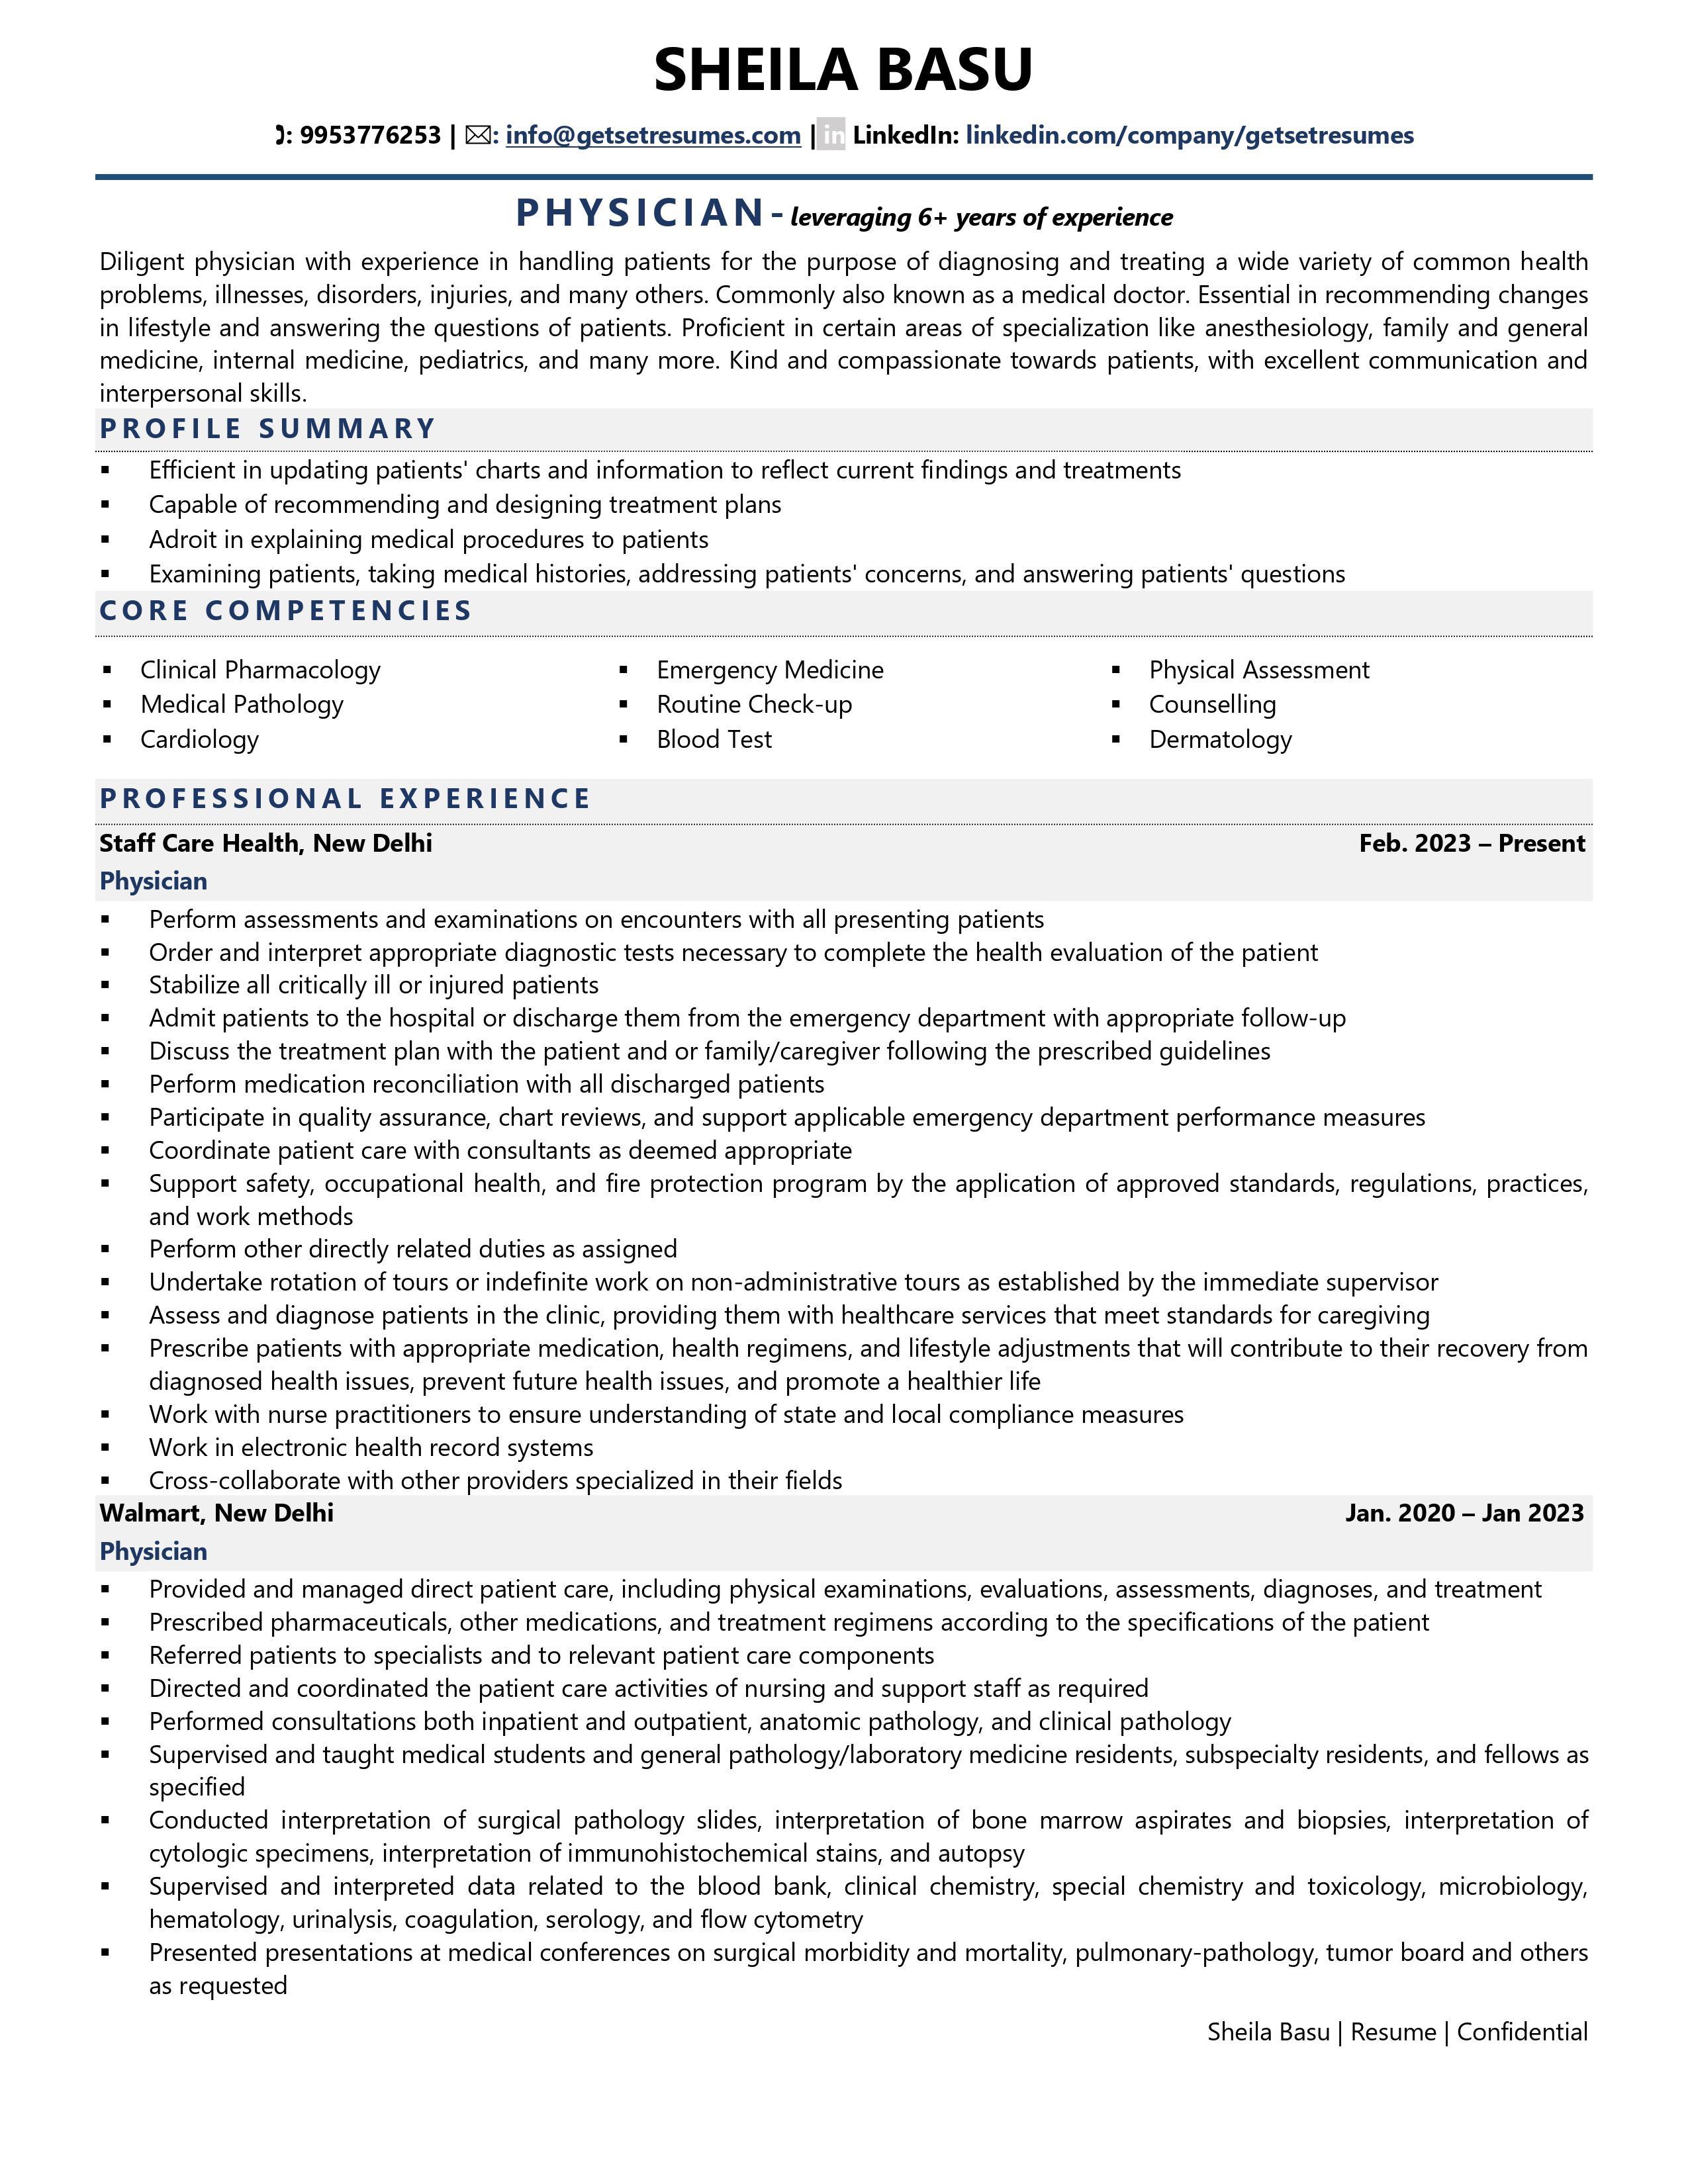 Physician - Resume Example & Template